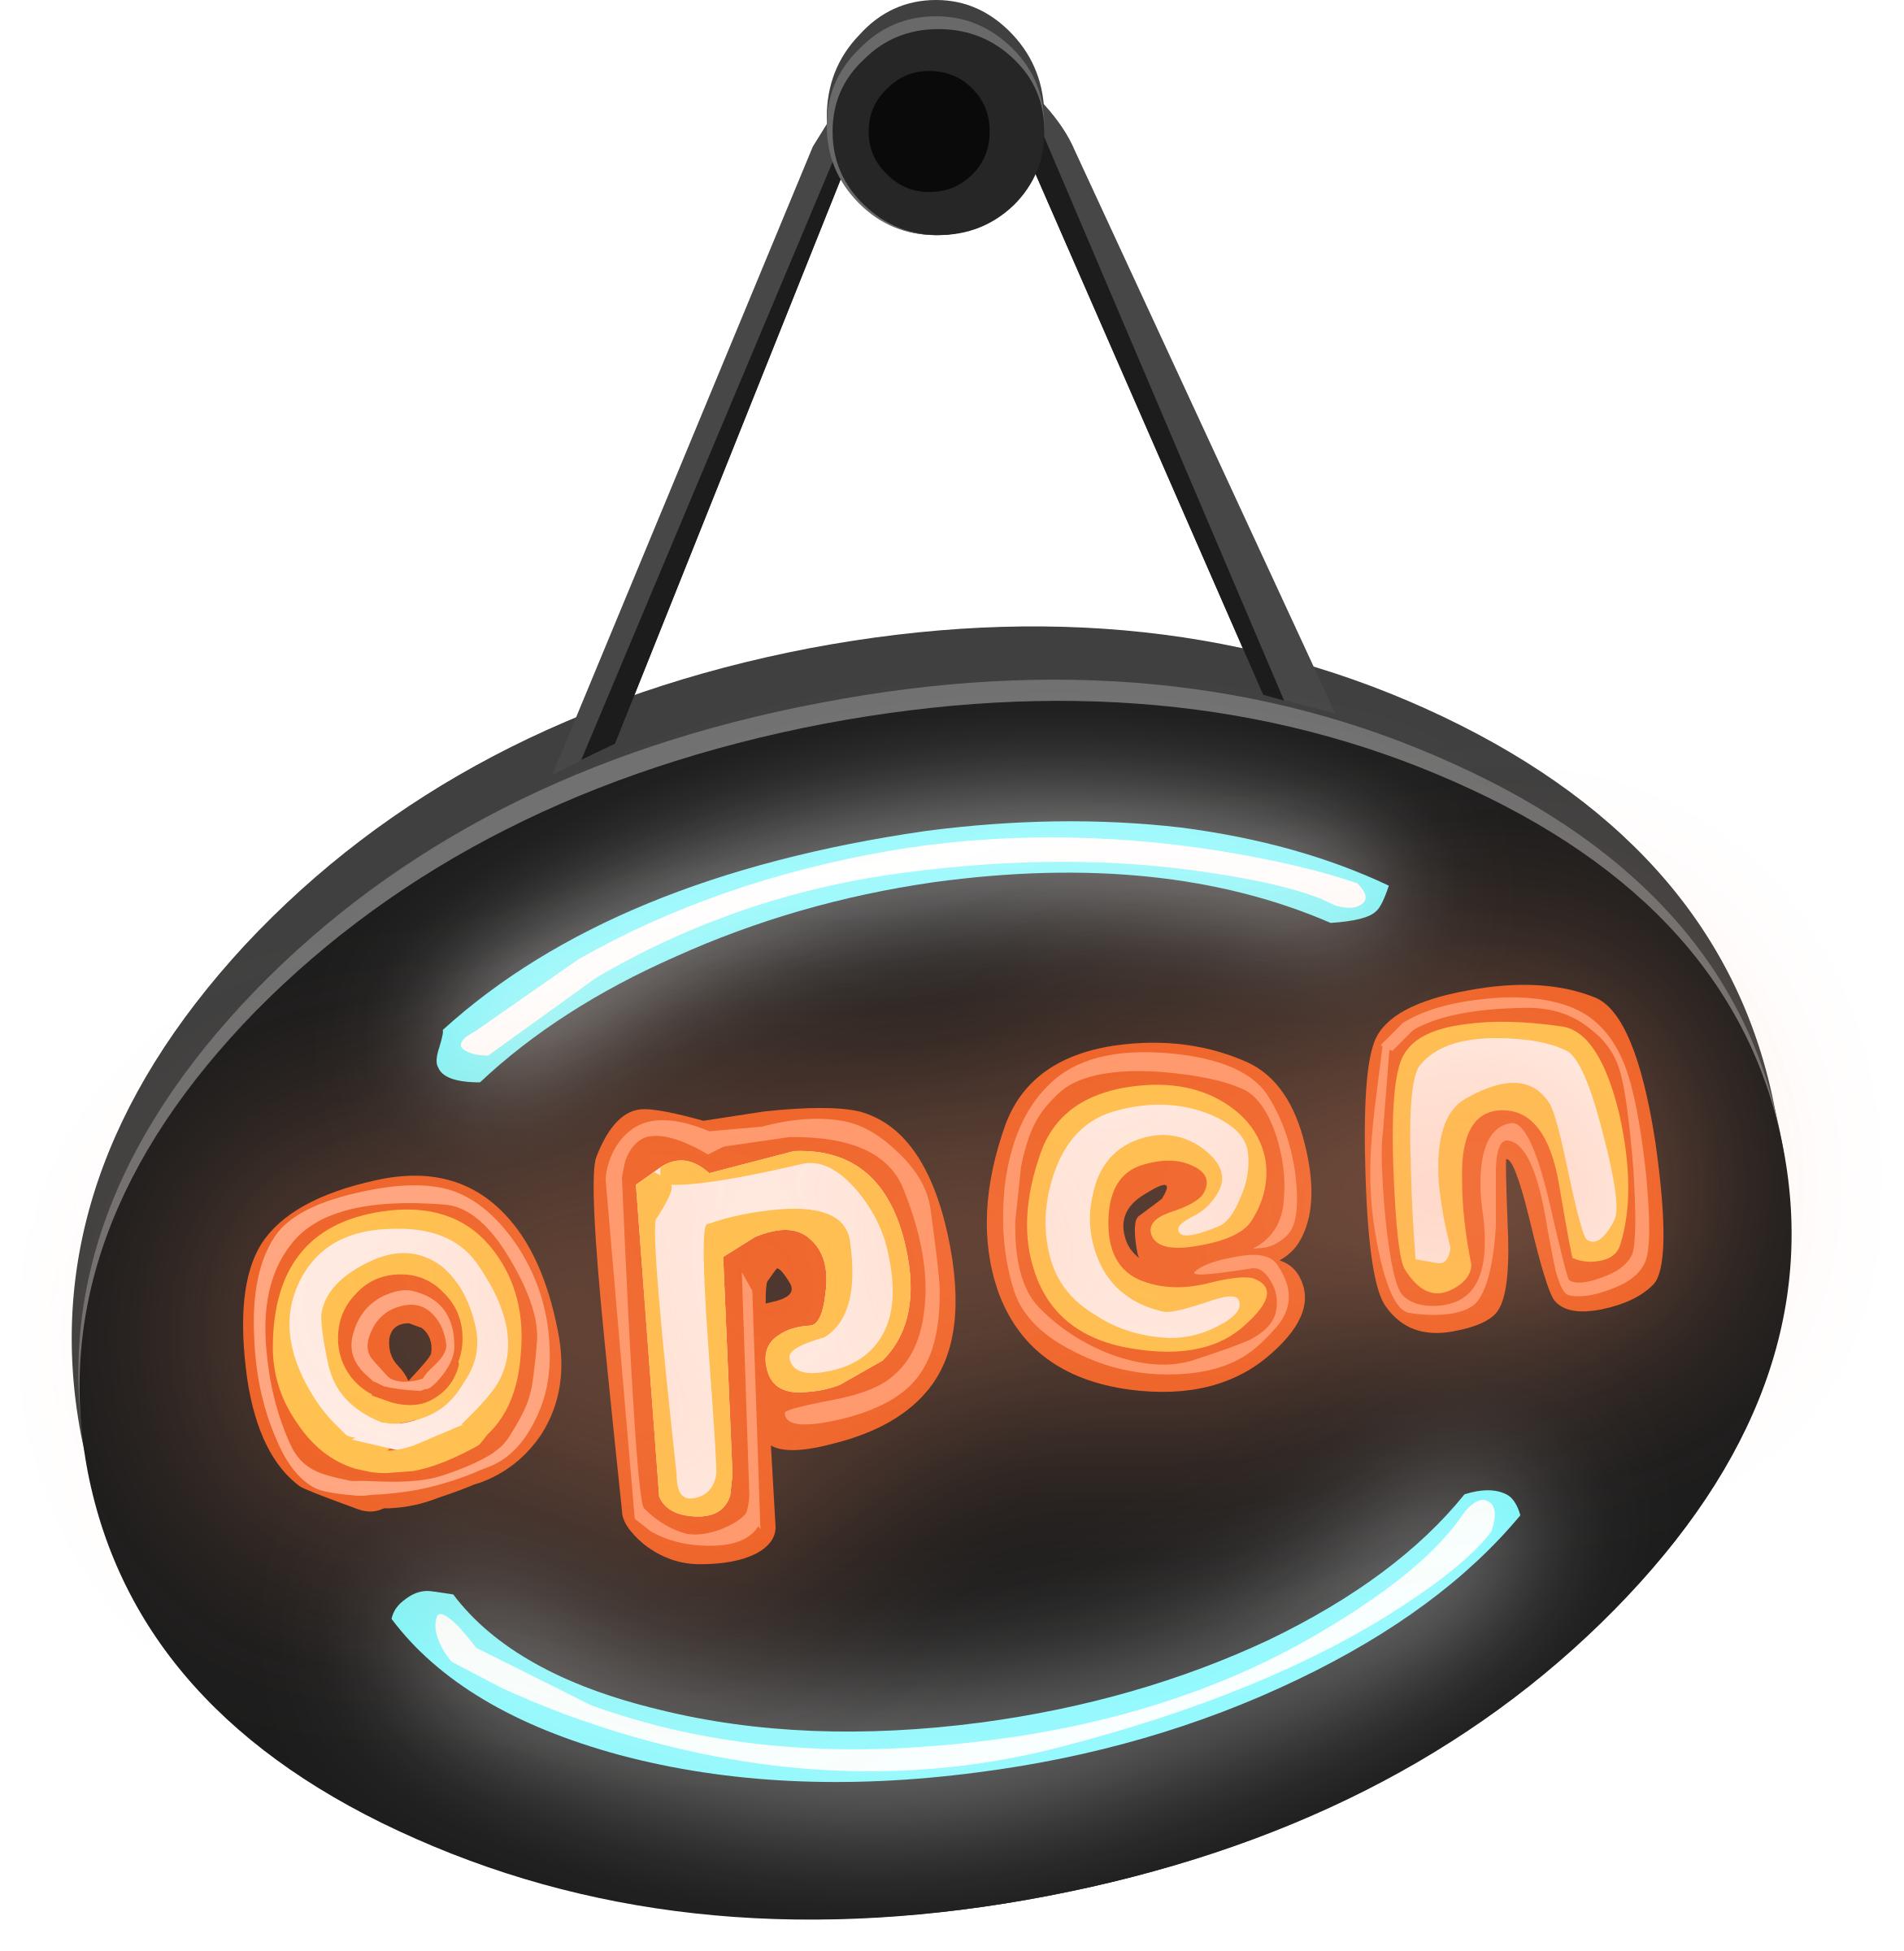 Neon 'Open' sign from Glitch png